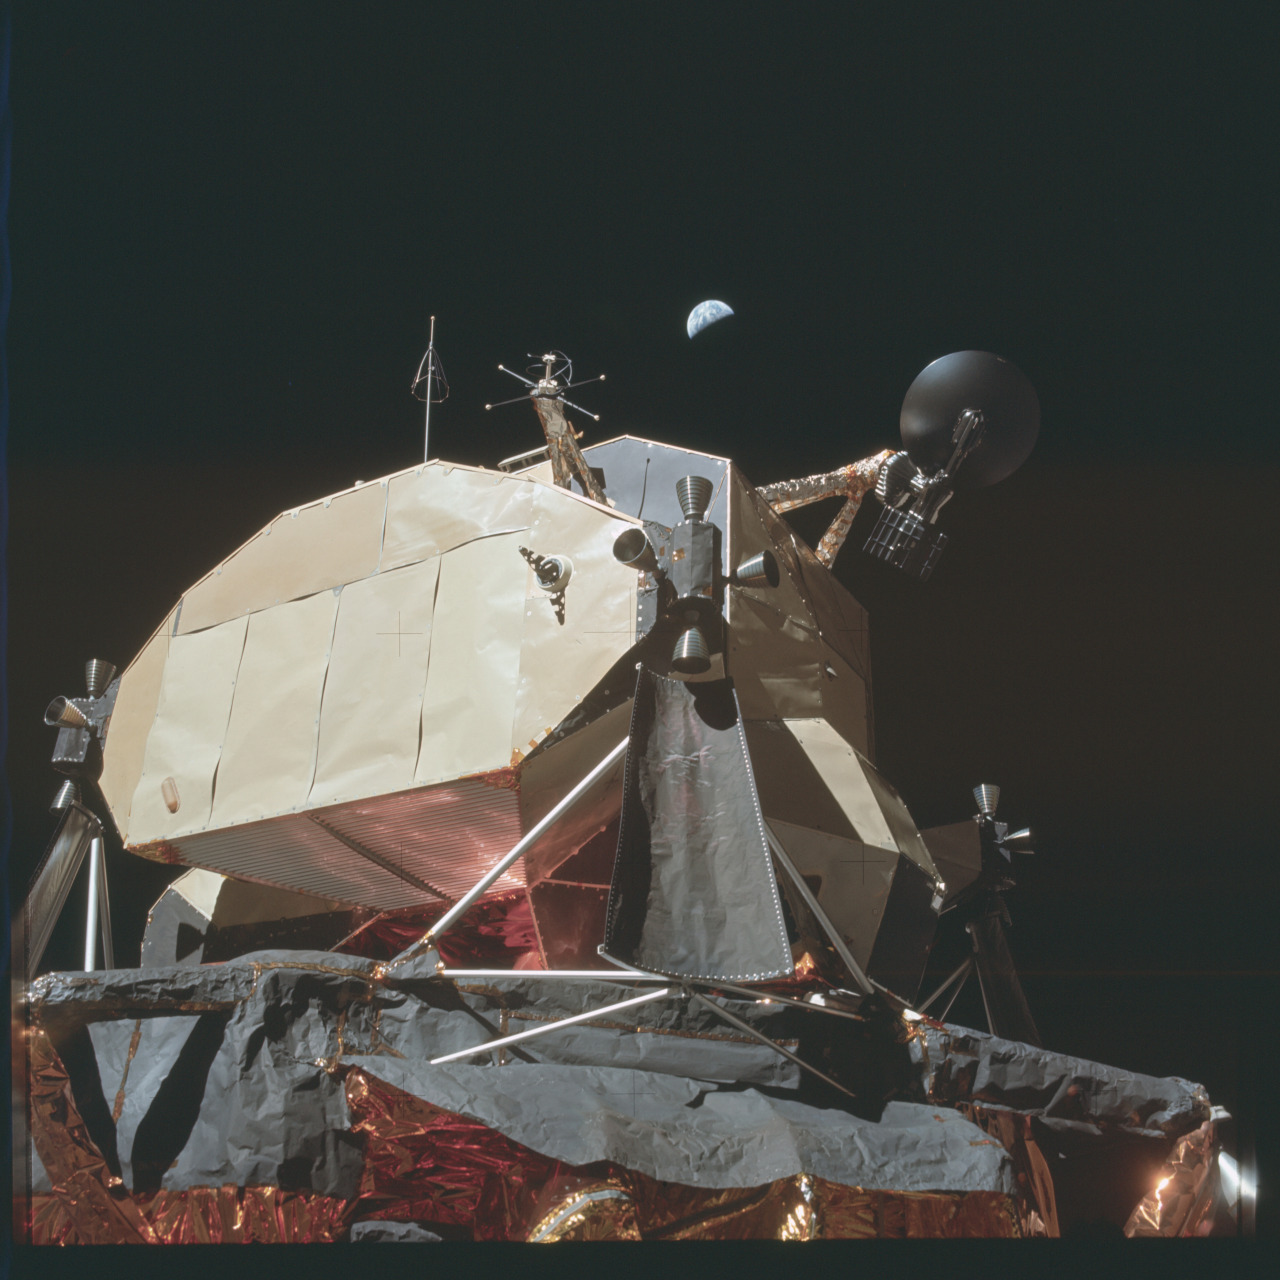 The half Earth appears in the black sy over the Lunar Module on the lunar surface. The spacecraft has a radio dish, black thermal blankets, and a tubular metal support structure. Credit: NASA